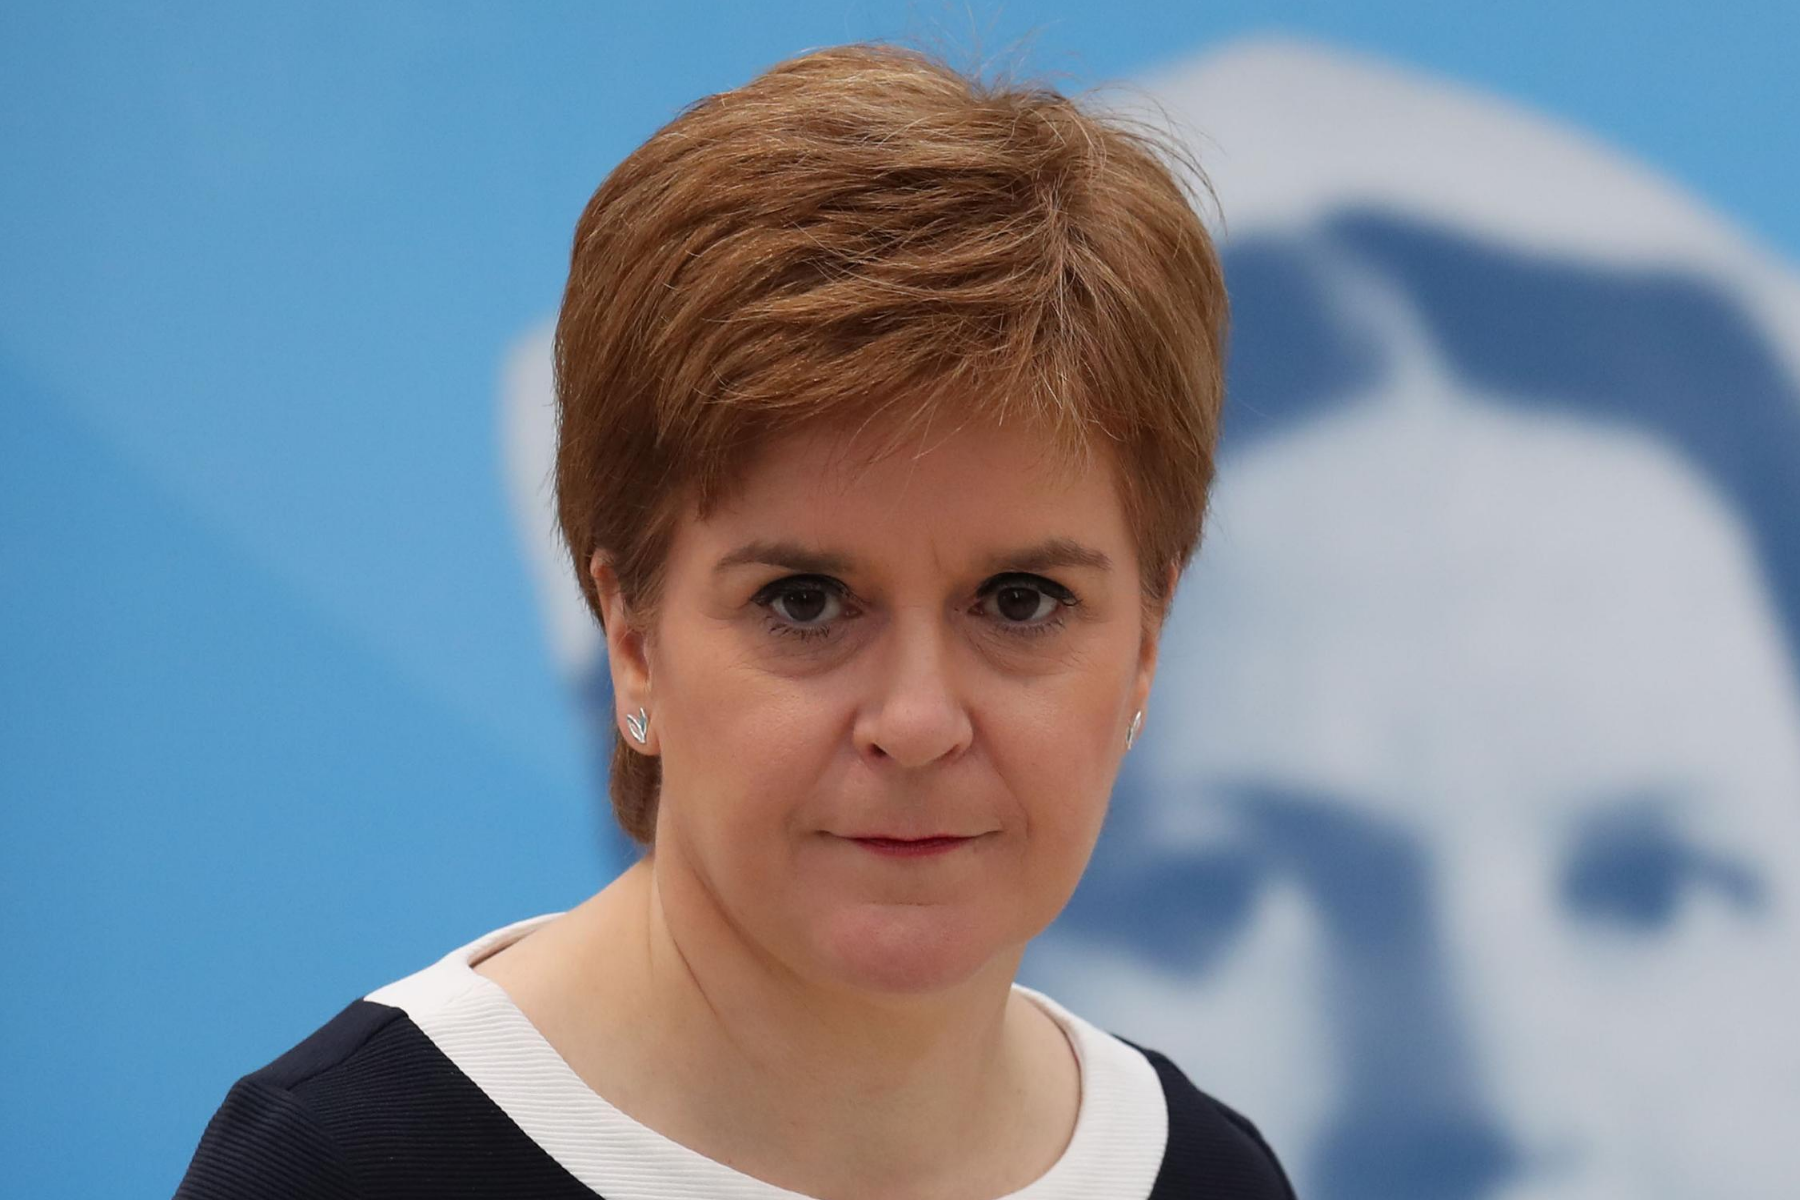 Nicola Sturgeon says Celtic and Aberdeen should not expect to play this week